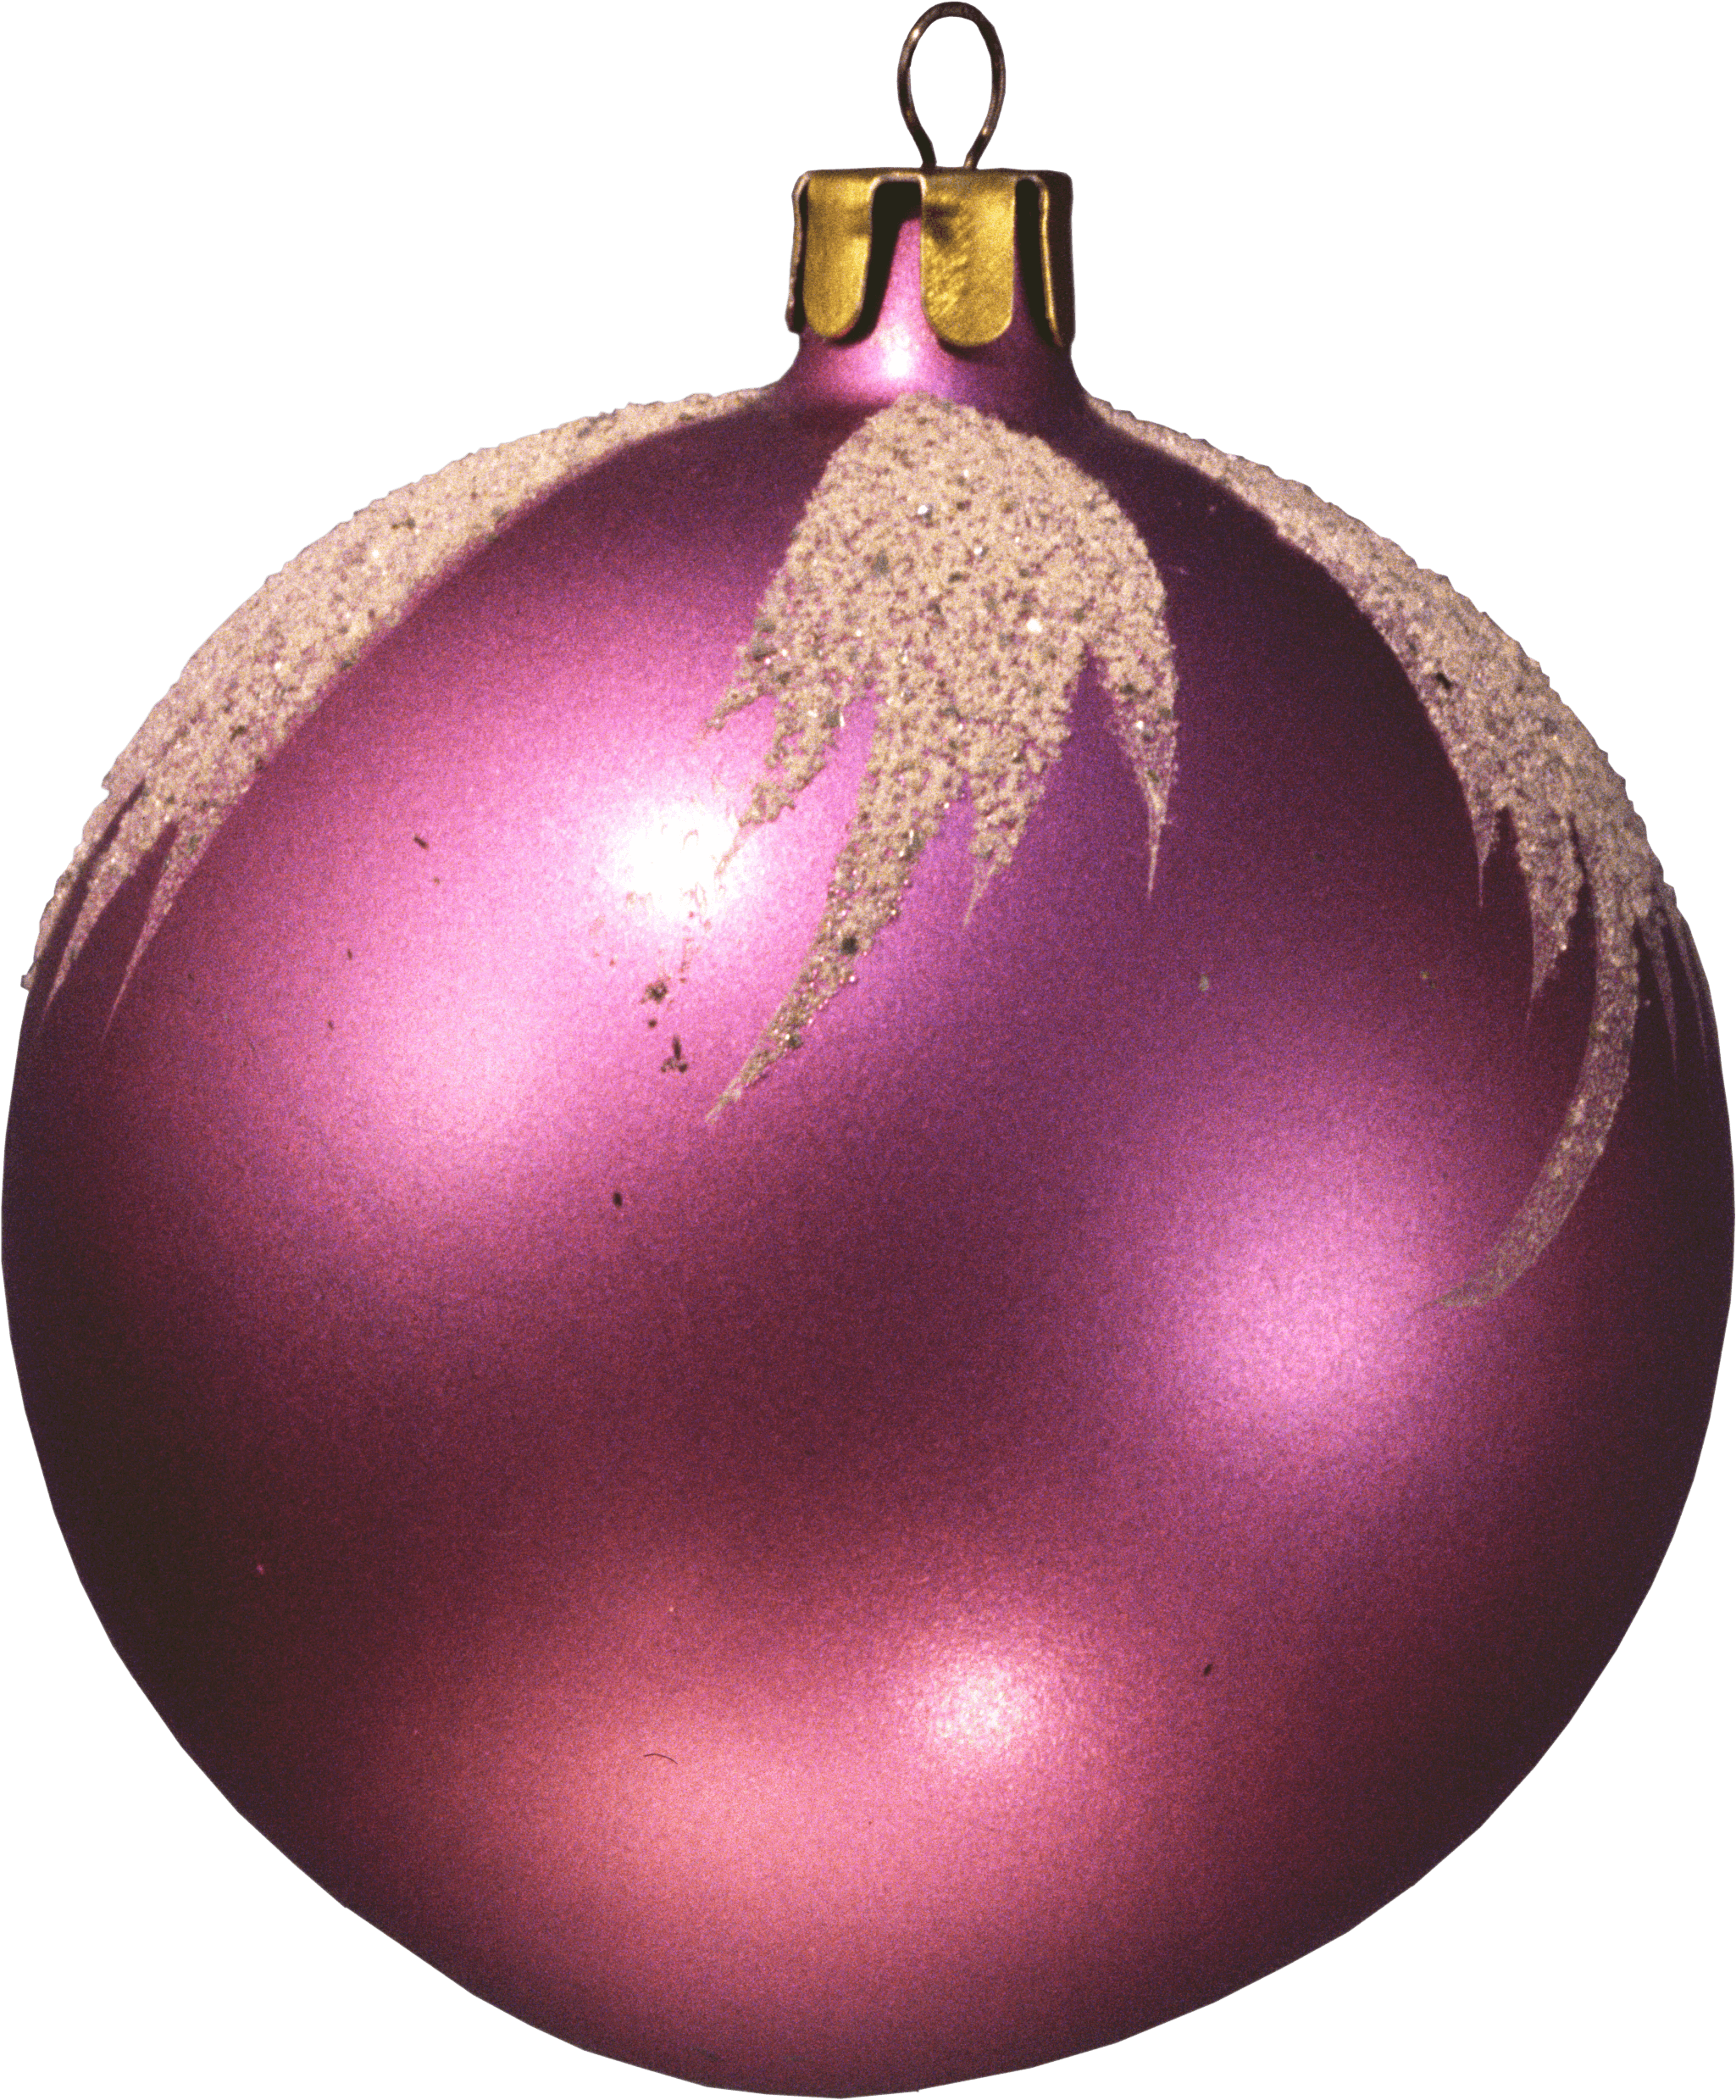 Purple clipart ornament. Christmas ball png image